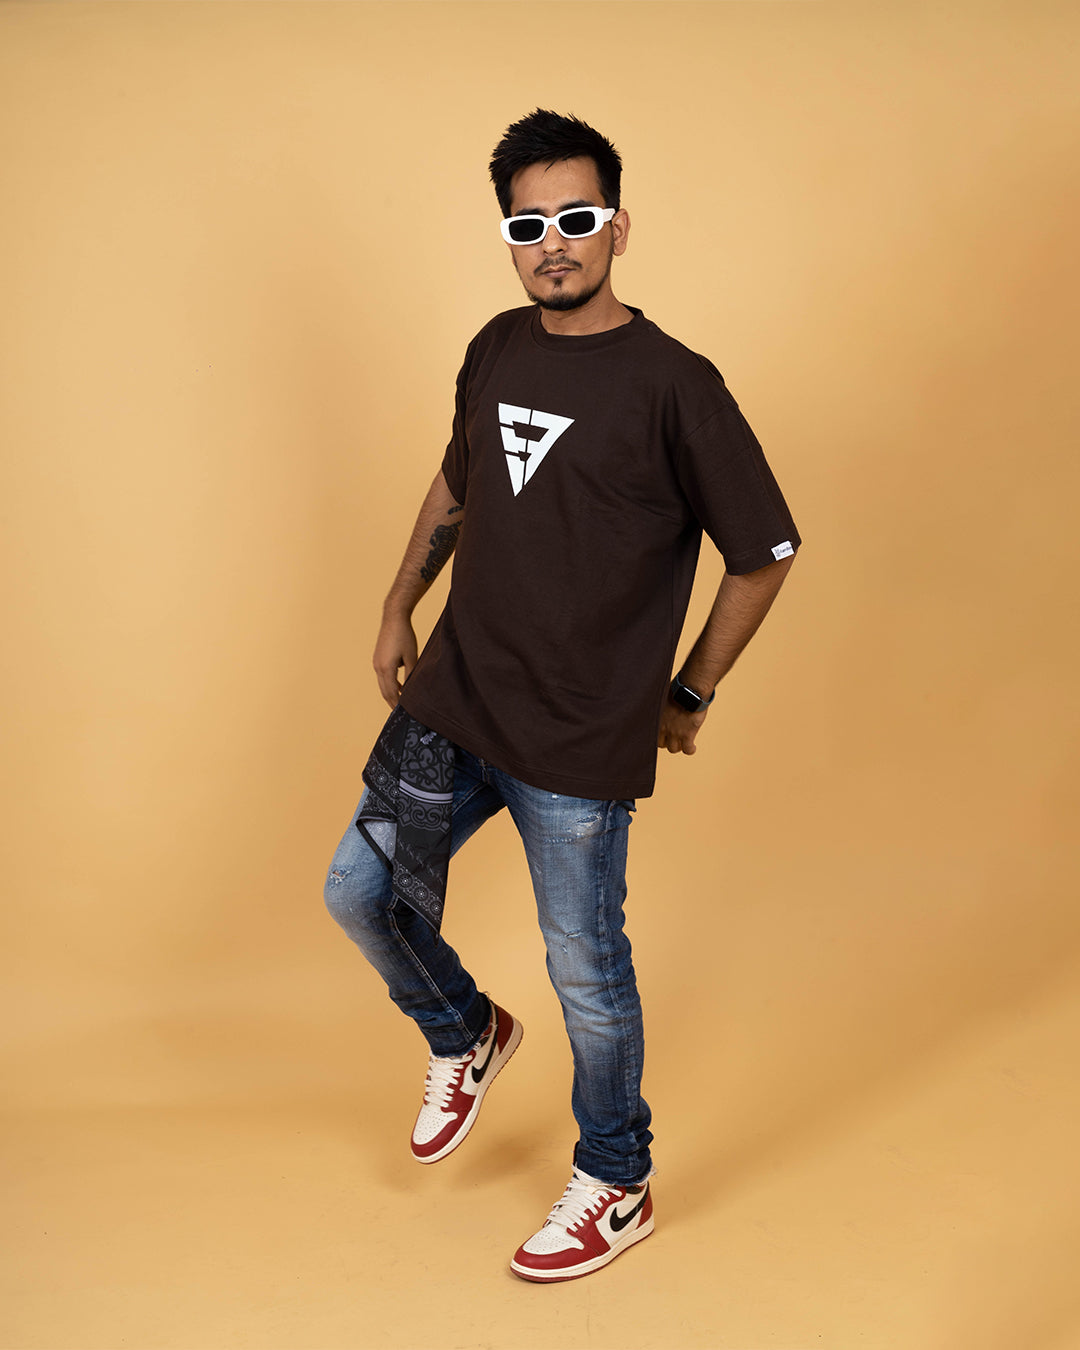 Fly High | Over Sized T-Shirt | Element7 | Brown